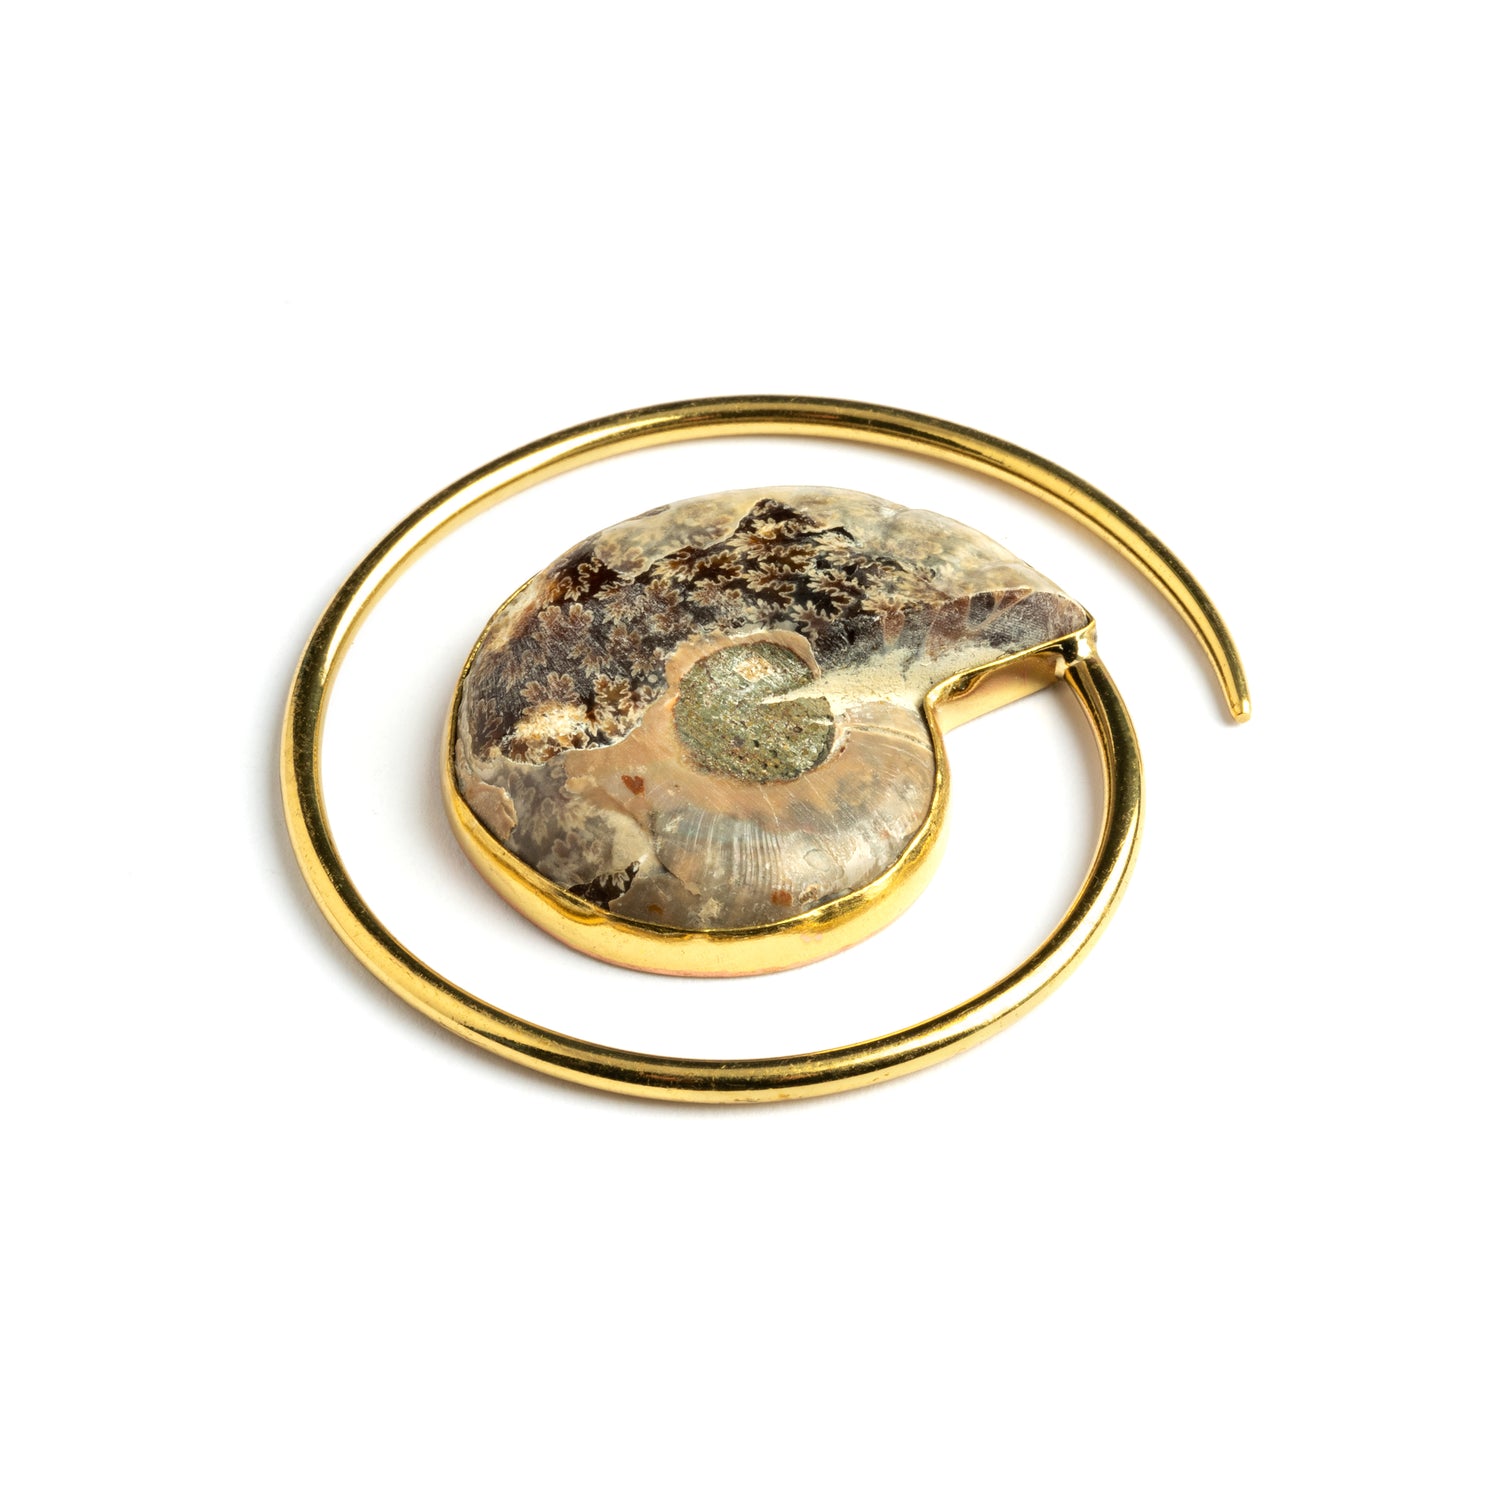 single golden spiral ear weight hanger with Ammonite fossil back view